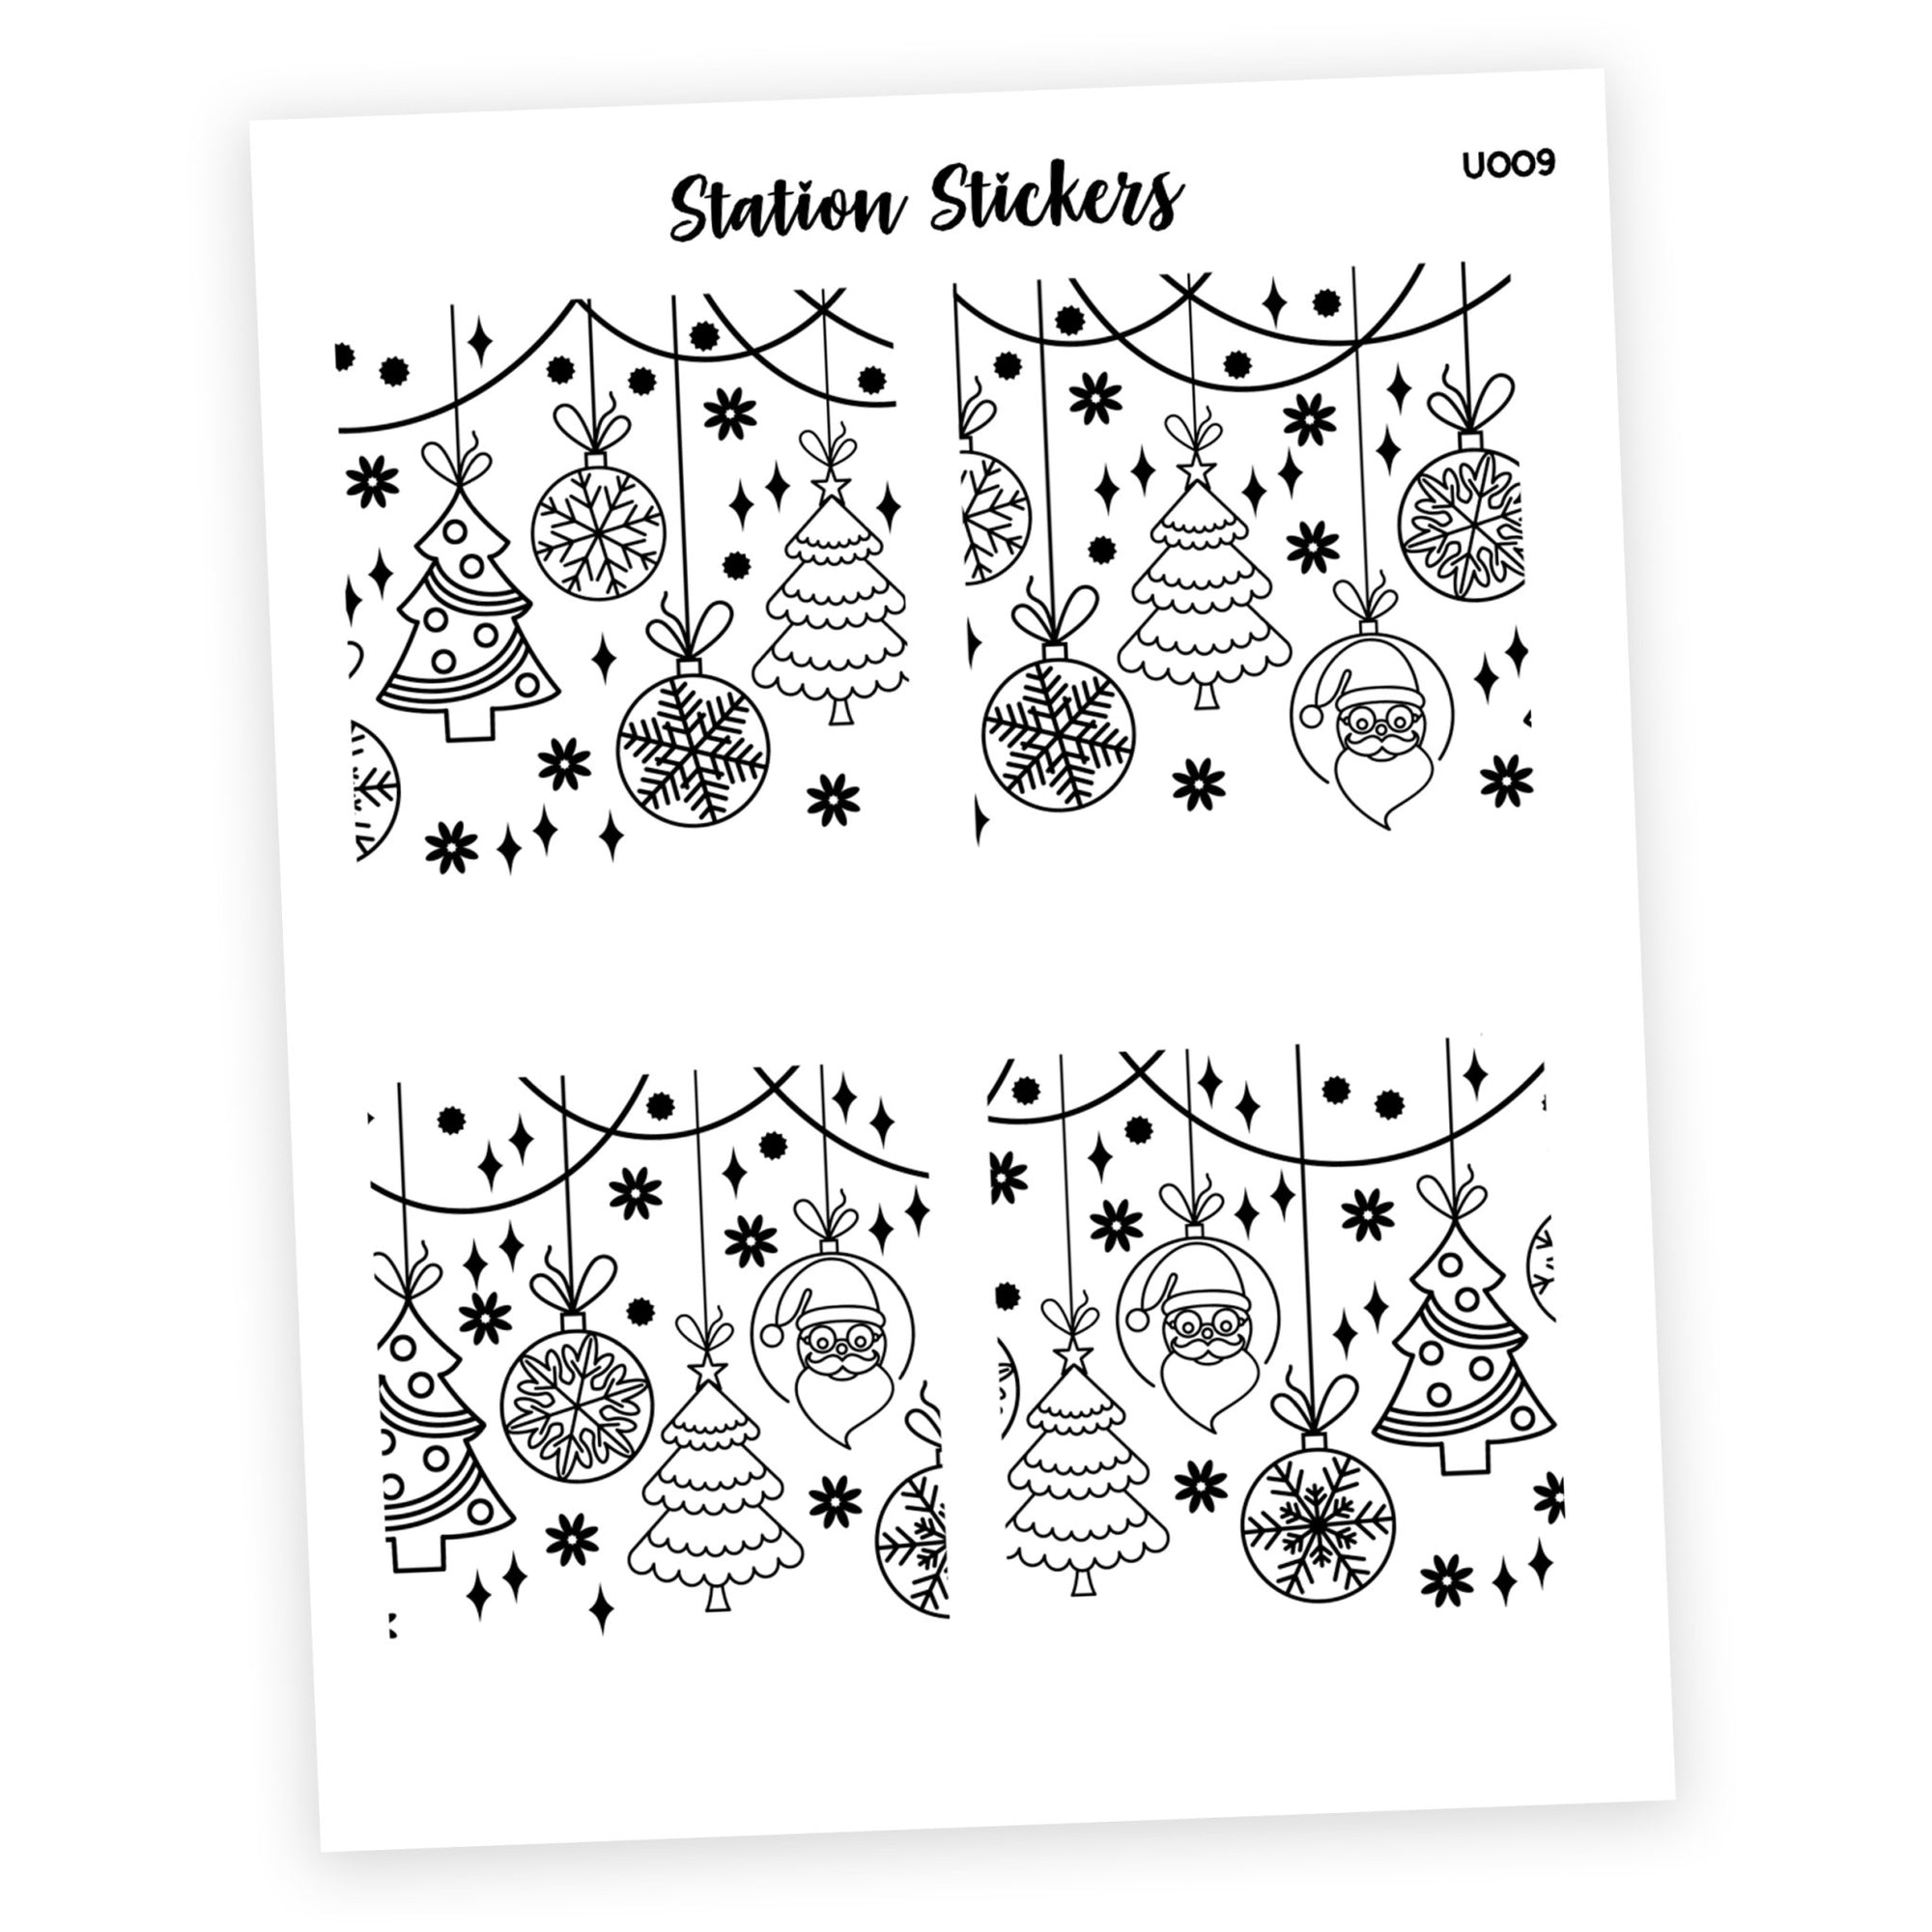 OVERLAY FULL BOX • HOLIDAY 3 - Station Stickers